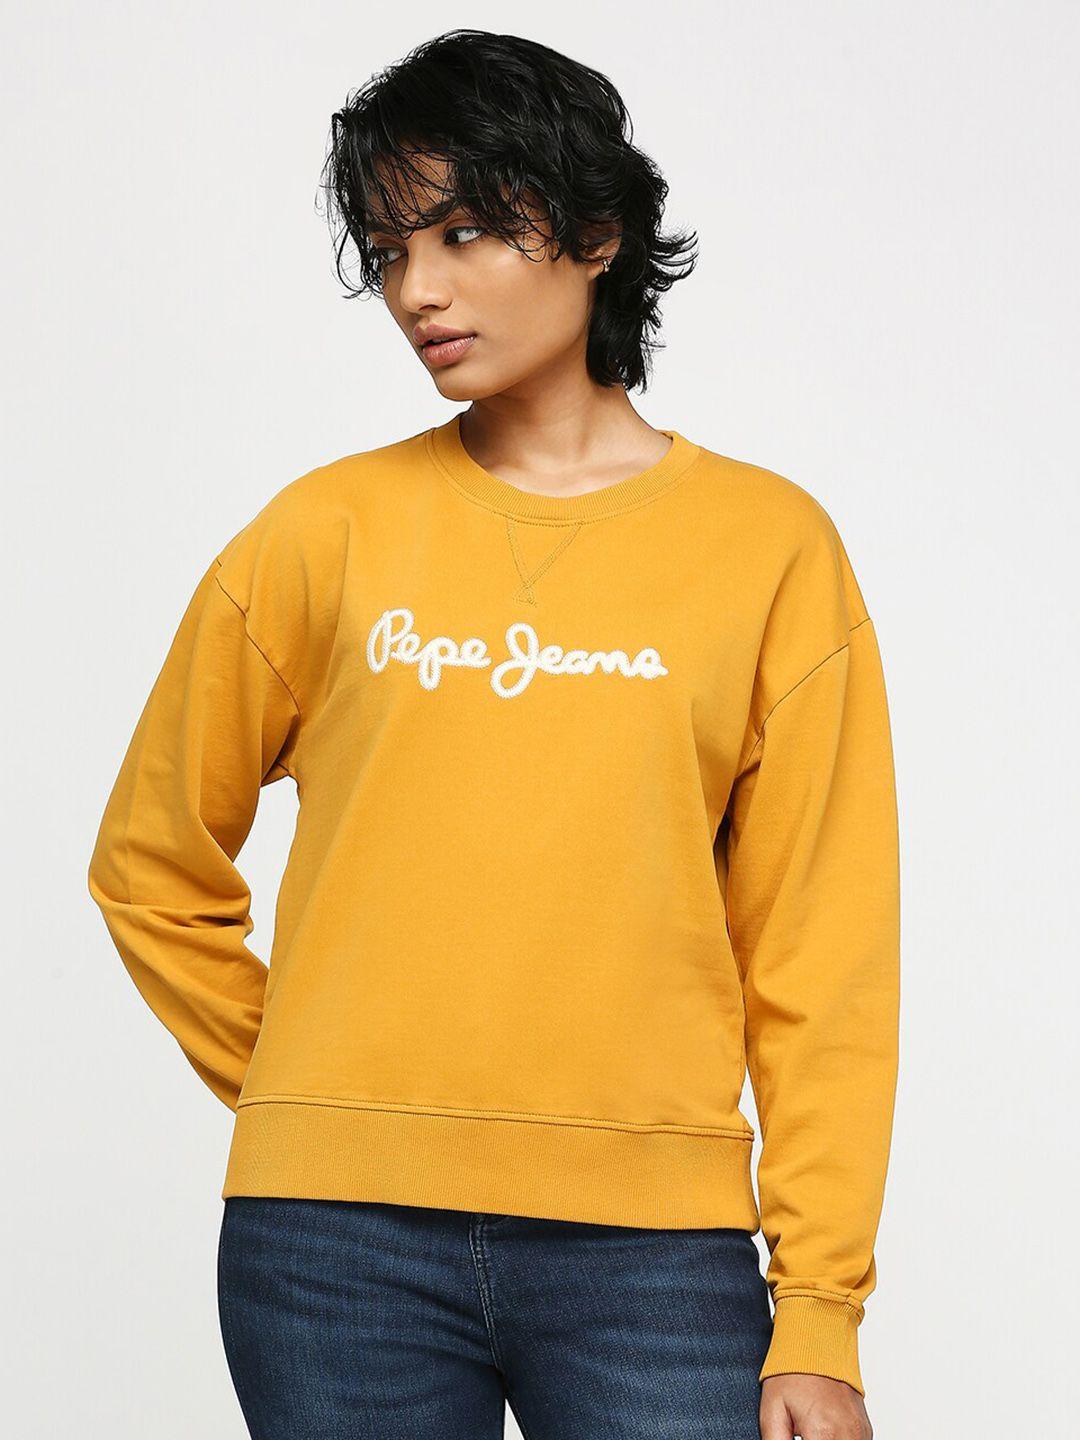 pepe jeans typography printed round neck pullover sweatshirt